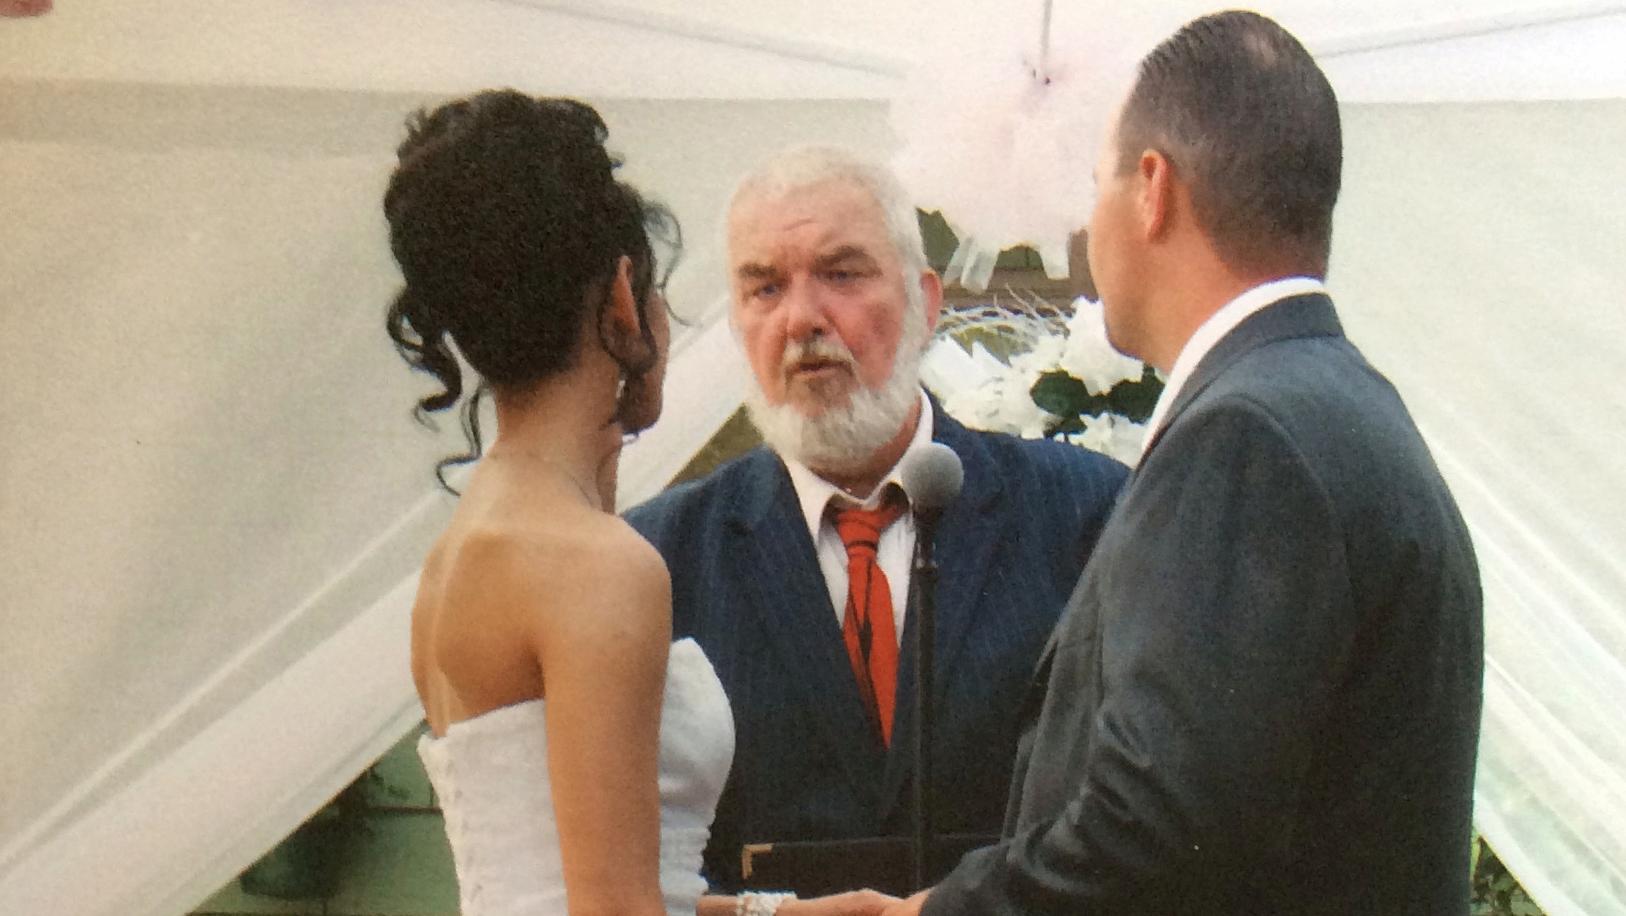 Couple looks at wedding officiant in ceremony